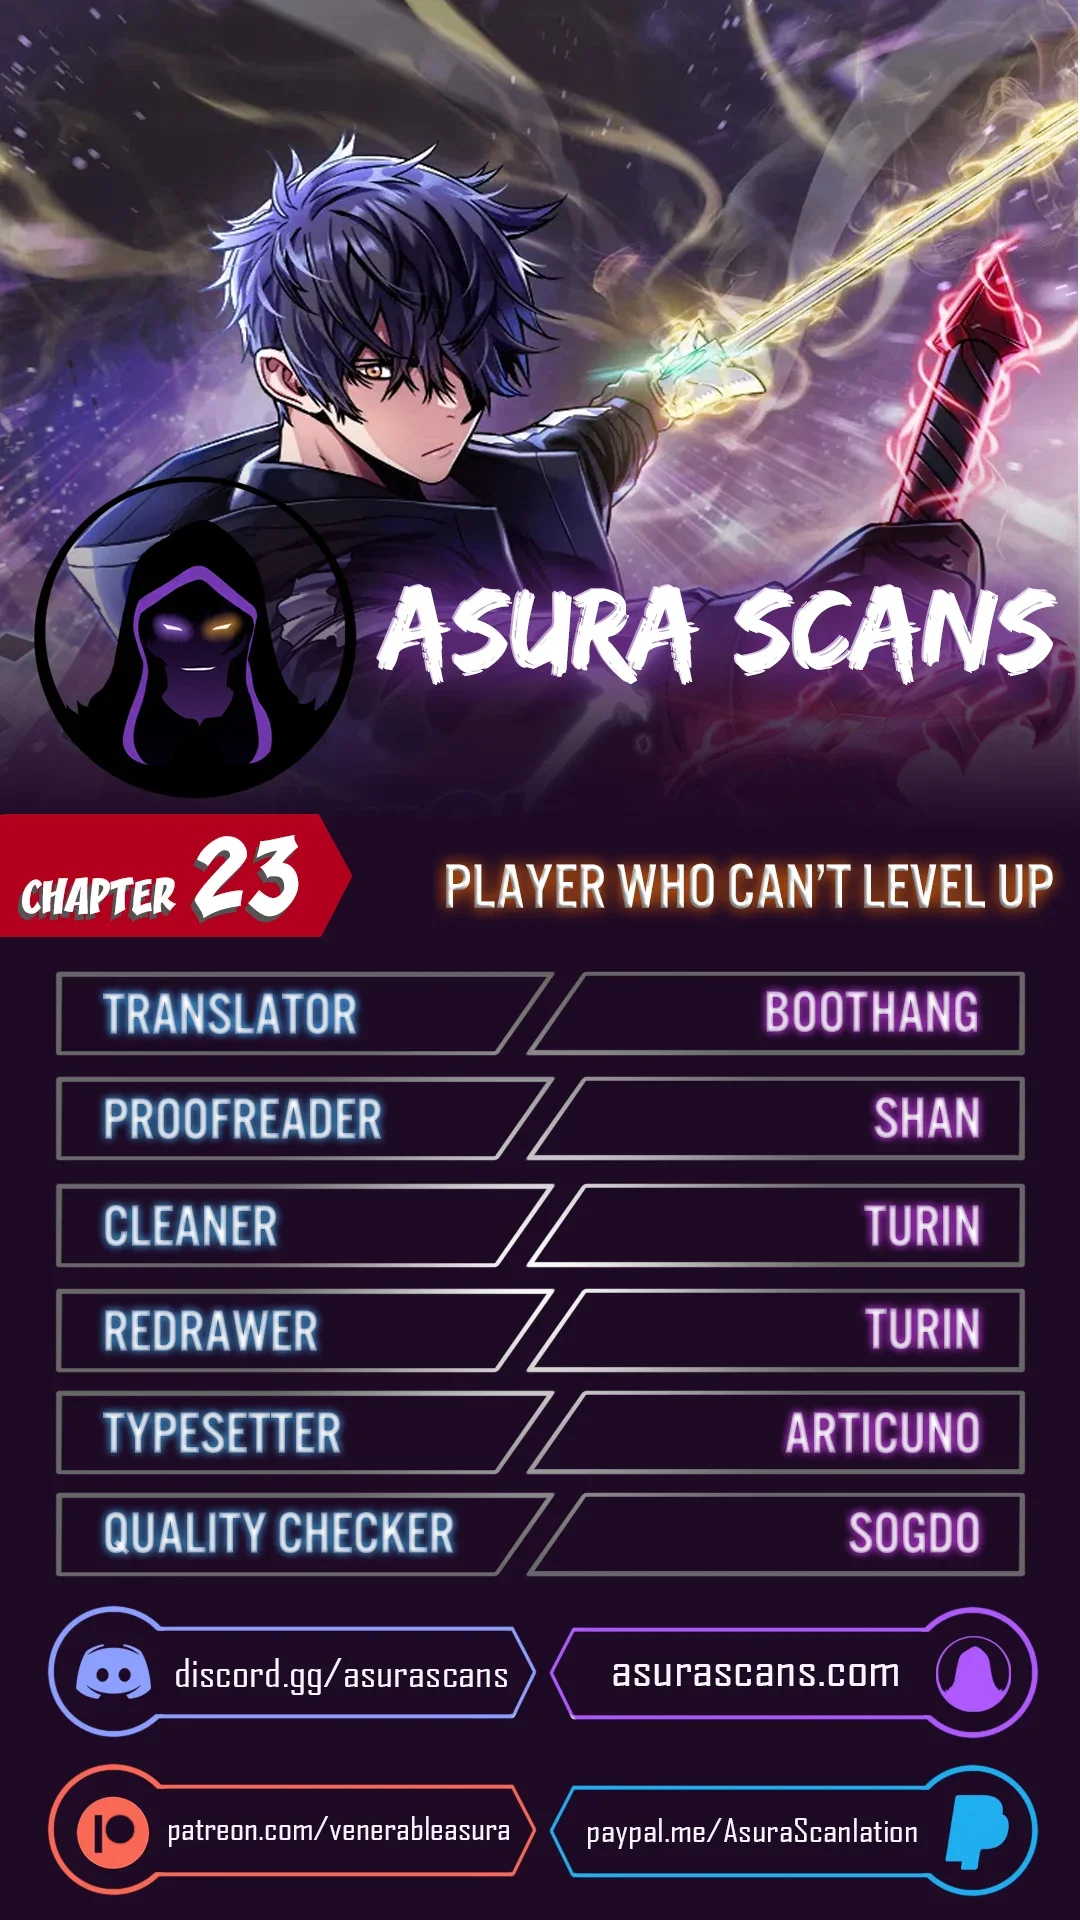 player-who-cant-level-up-chap-23-0